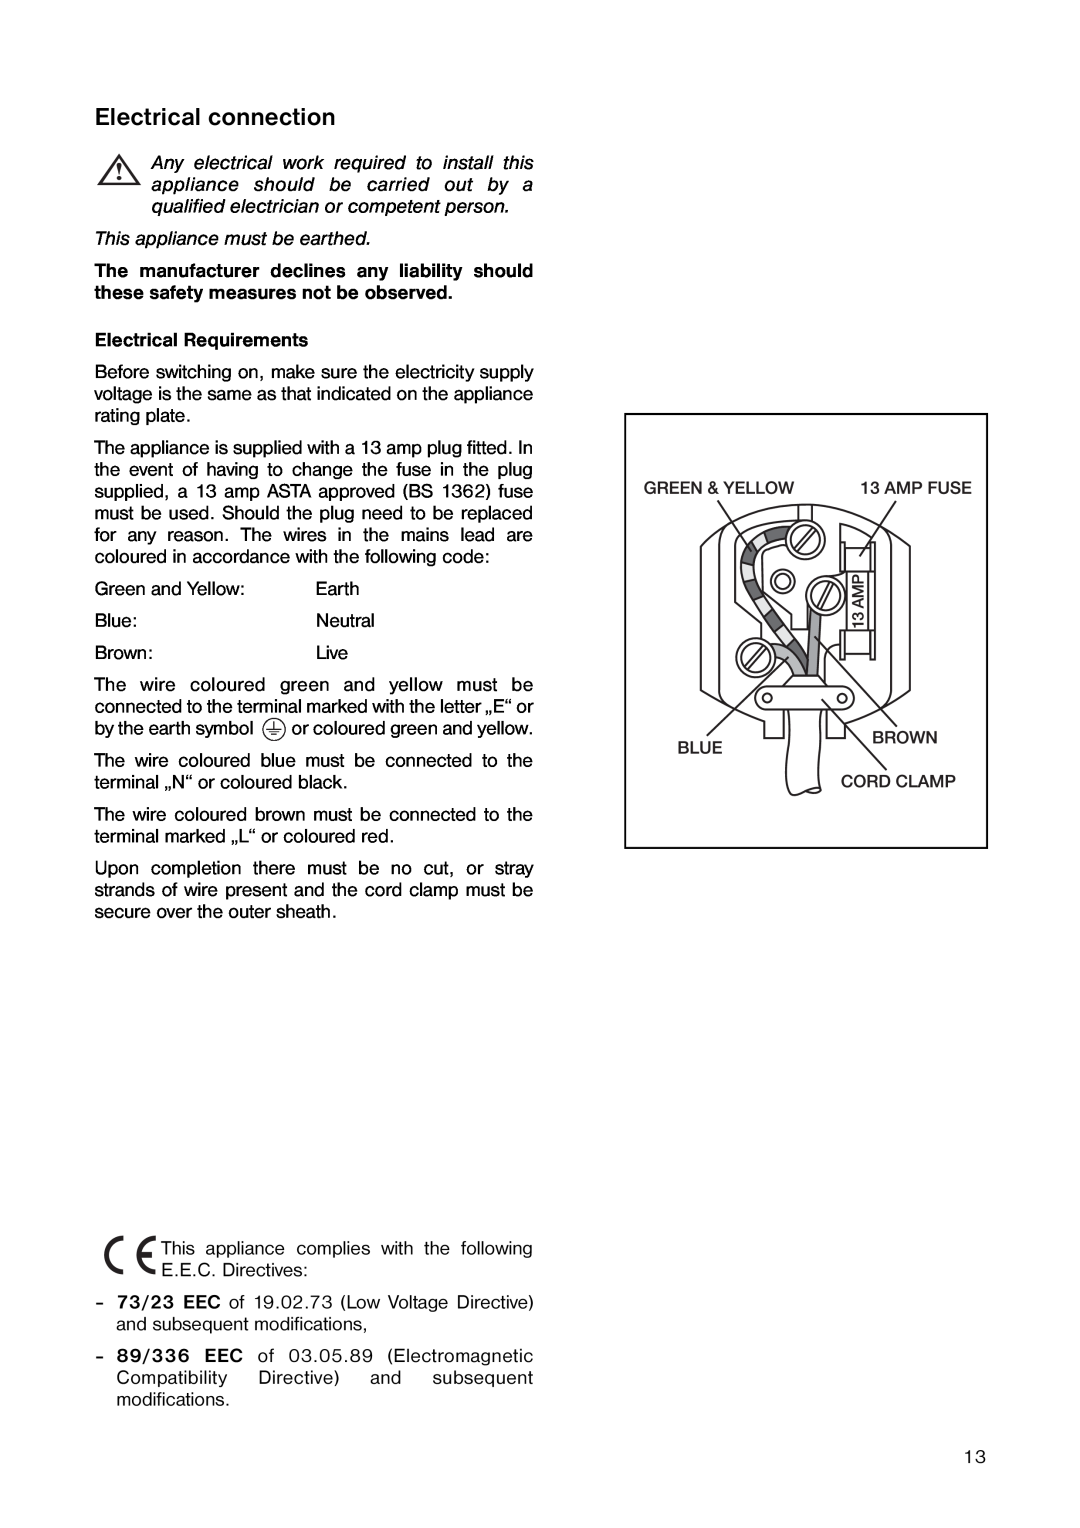 Electrolux ER 5763 C manual Electrical connection, This appliance must be earthed, Electrical Requirements 